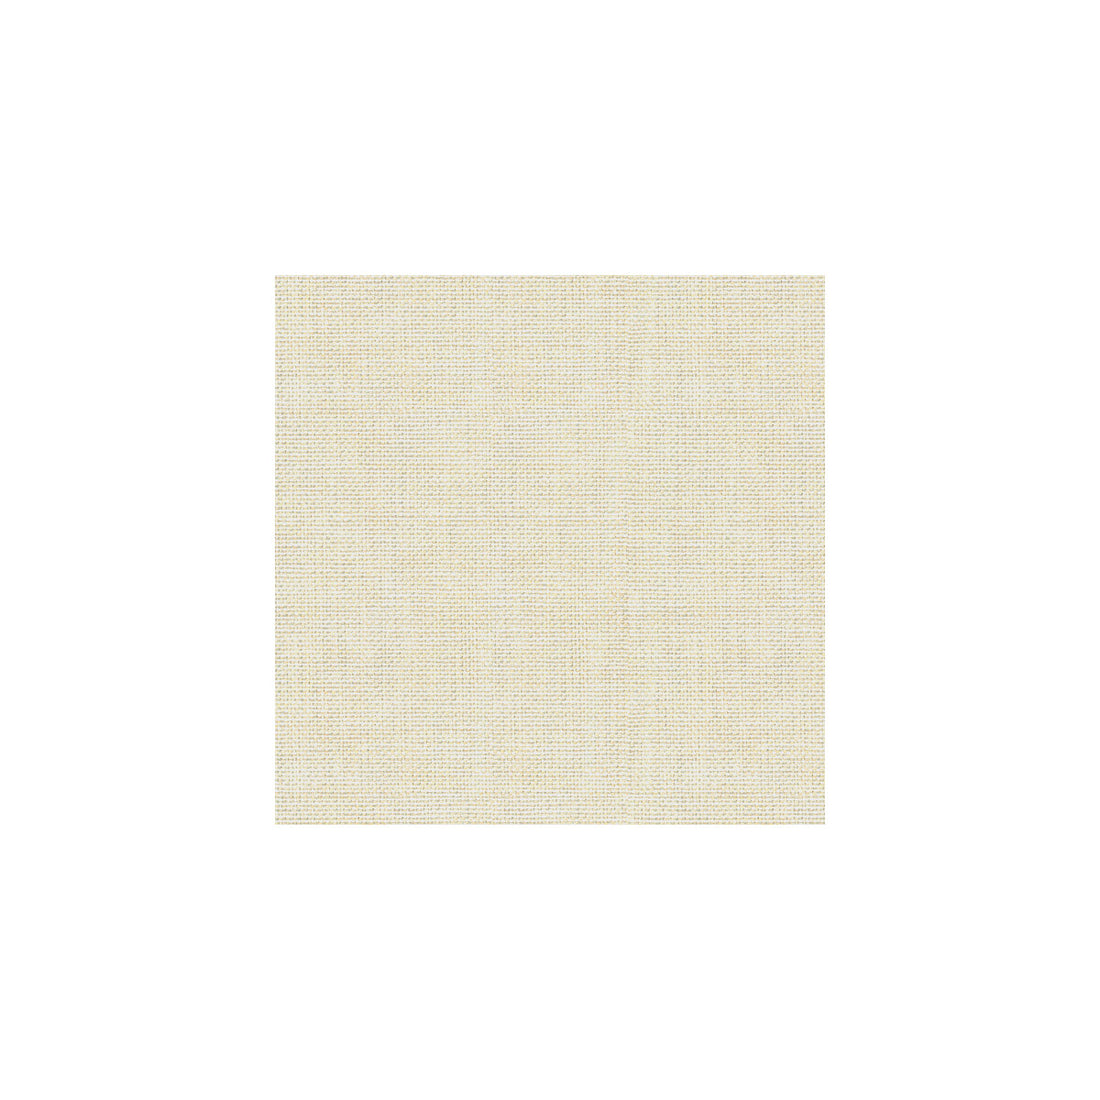 Kravet Basics fabric in 30299-111 color - pattern 30299.111.0 - by Kravet Basics in the Perfect Plains collection